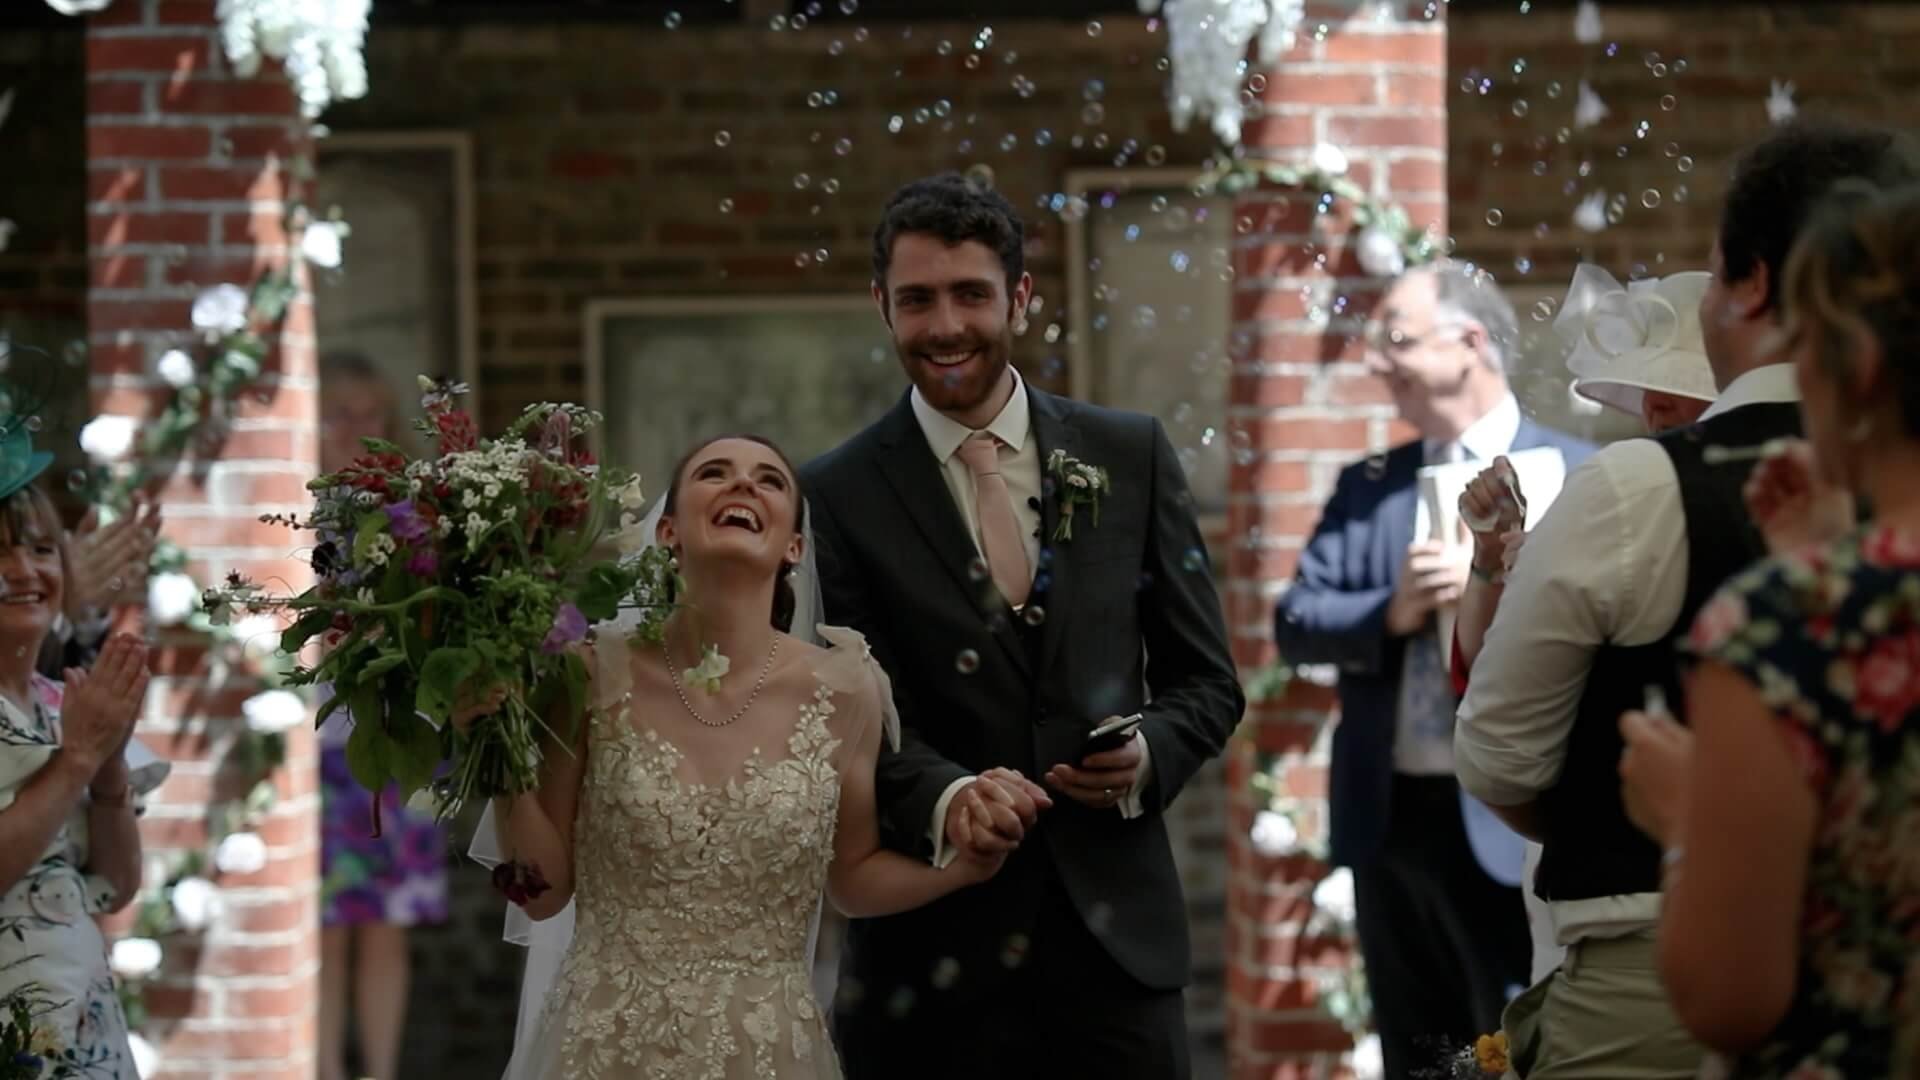 Callum &amp; Toni walk down the aisle after being officially announced husband and wife, with guests blowing bubbles